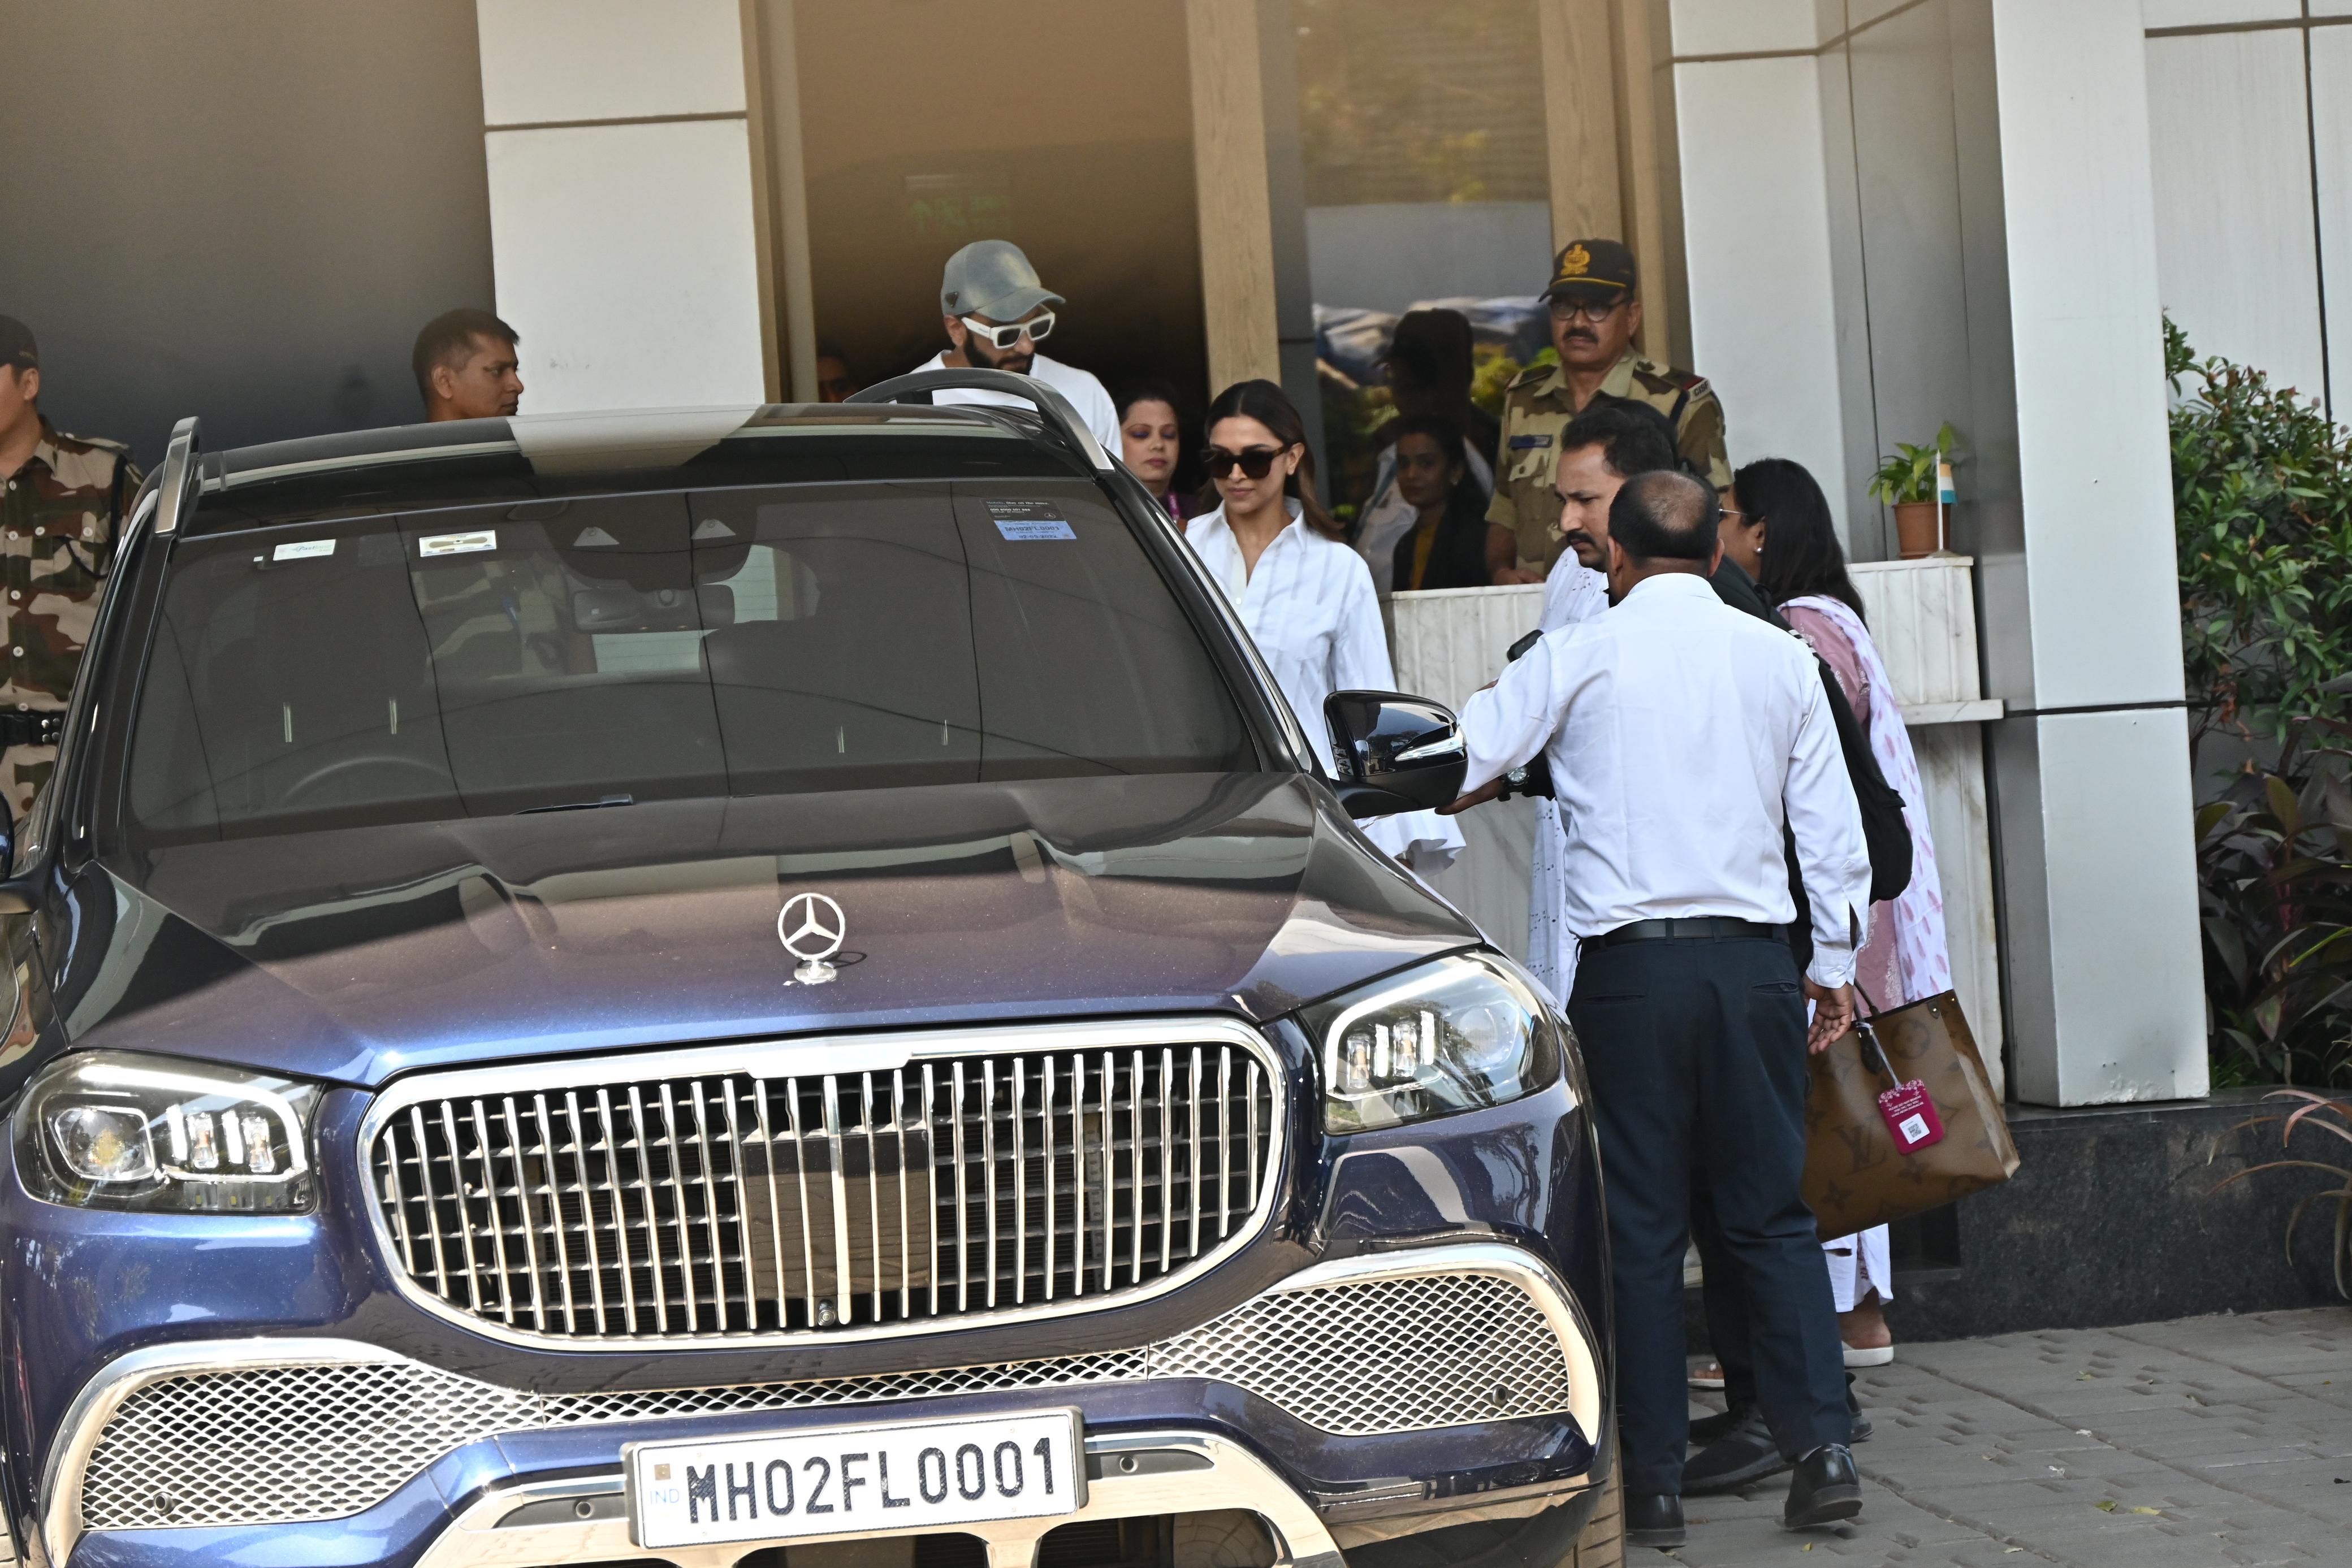 Parents-to-be Deepika Padukone and Ranveer Singh were spotted back in the bay after a few days of revelry in Jamnagar